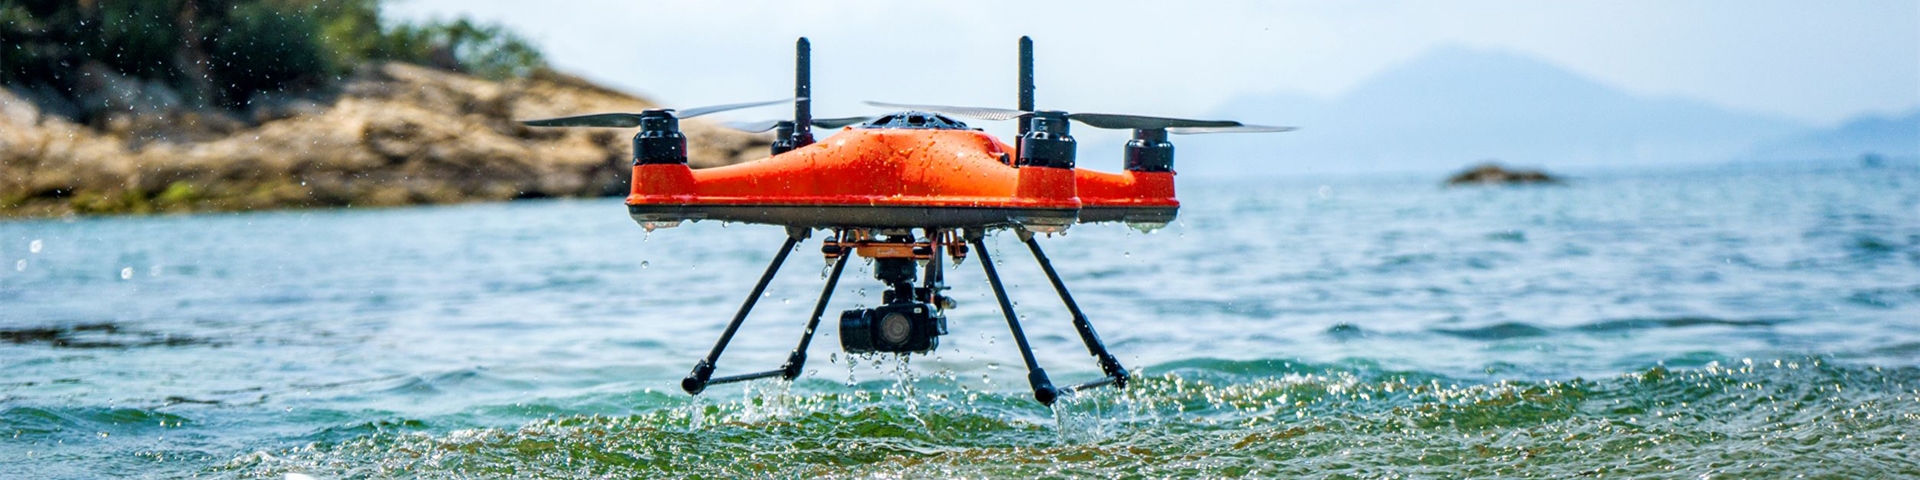 Waterproof Drone. No longer worry about drones falling into the water